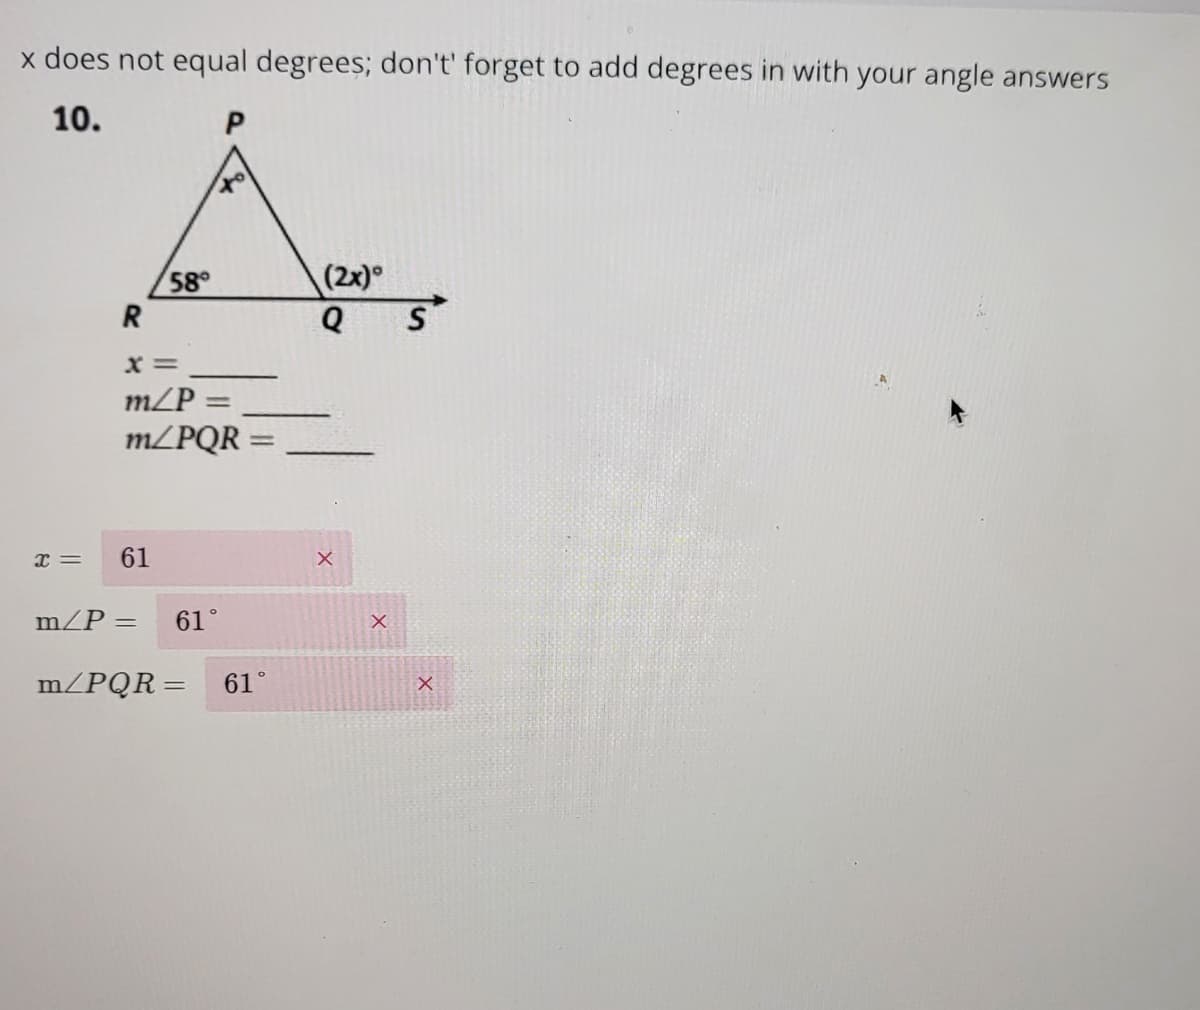 x does not equal degrees; don't' forget to add degrees in with your angle answers
10.
P
Á
58°
(2x)
R
x=
X=
m/P =
m/PQR
61
m/P =
61°
=
m/PQR= 61°
Q S
X
X